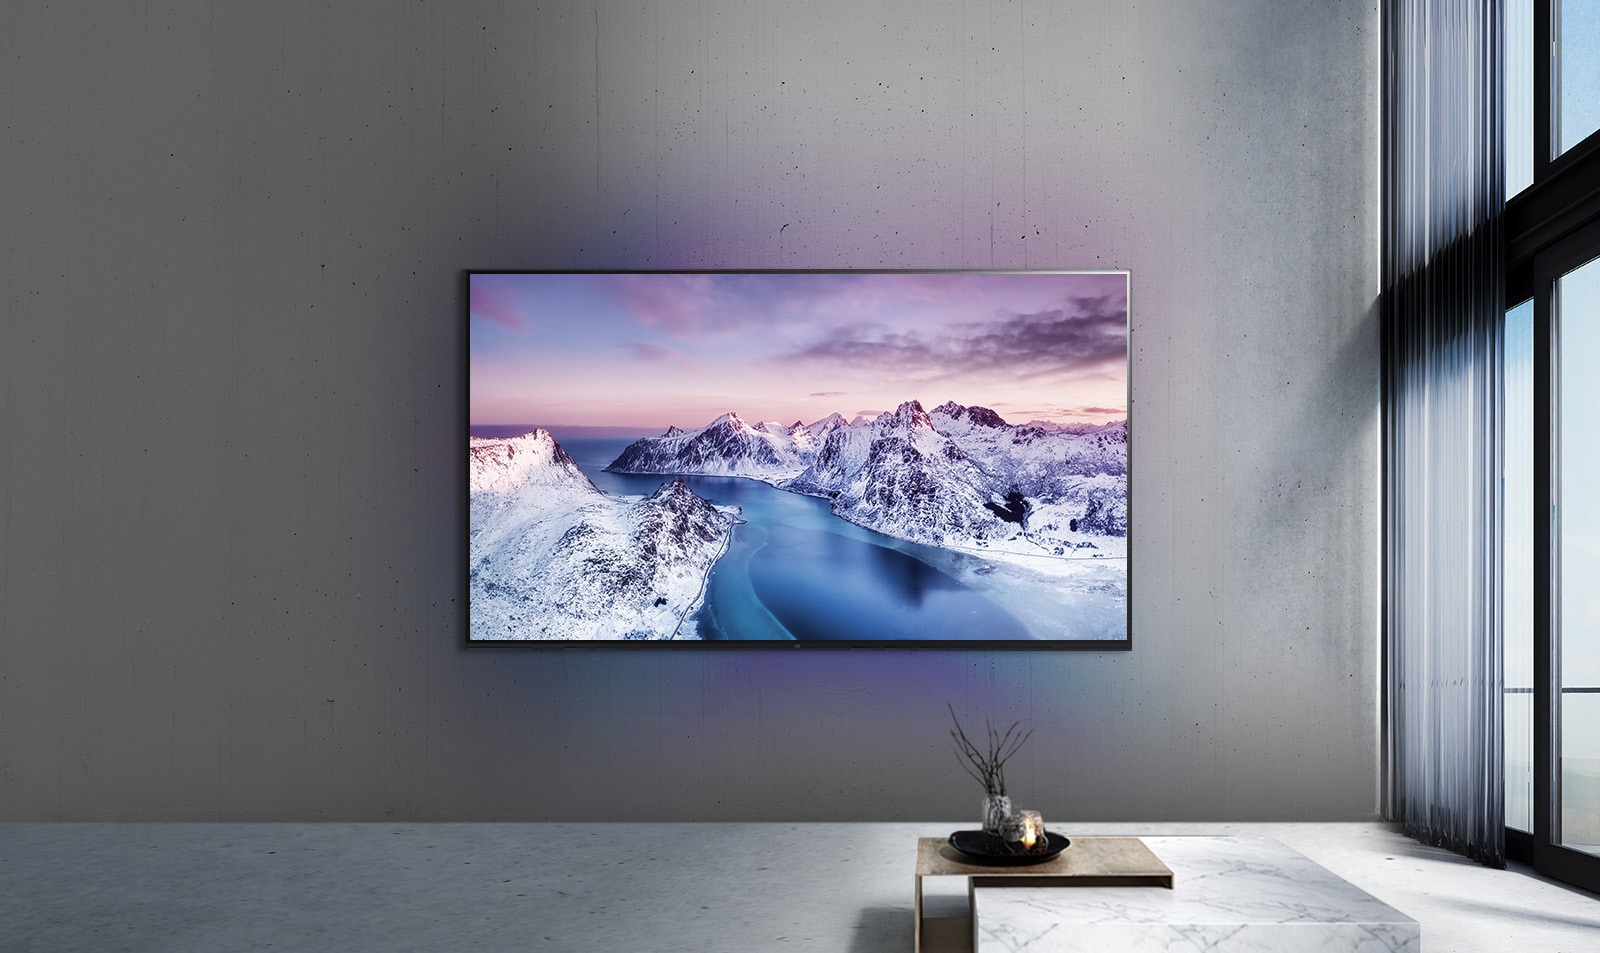 A UHD TV mounted on the wall behind a Zen-style flap.